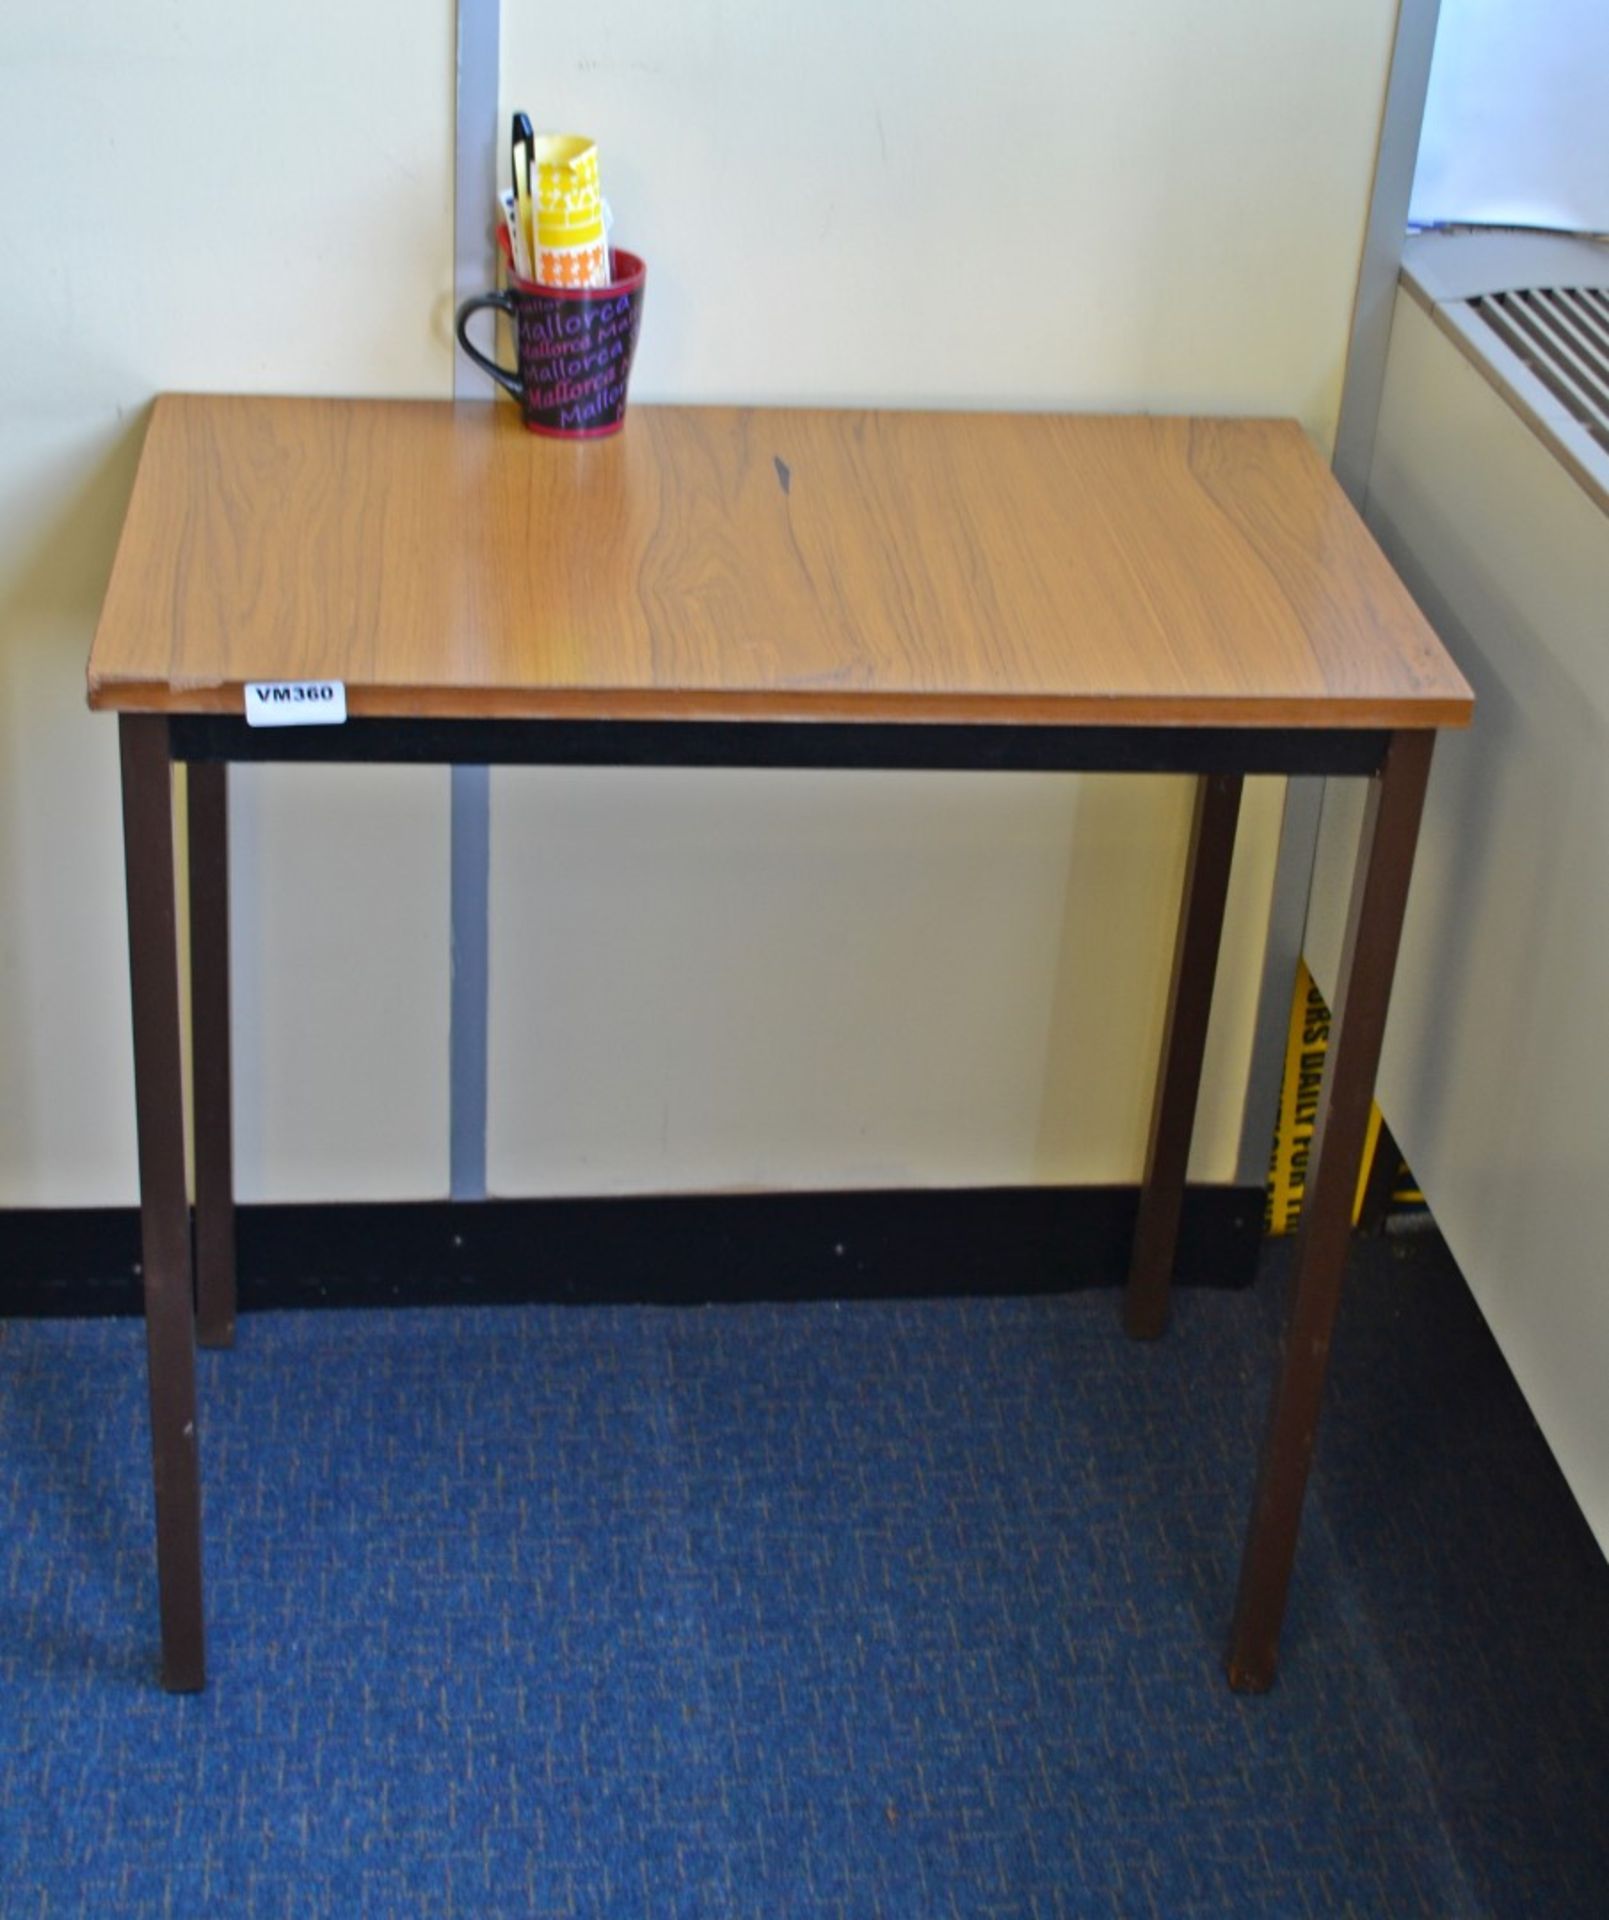 4 x Small Side Office Tables - Ref: VM360, VM363 - CL409 - Location: Wakefield WF16 - Image 2 of 7